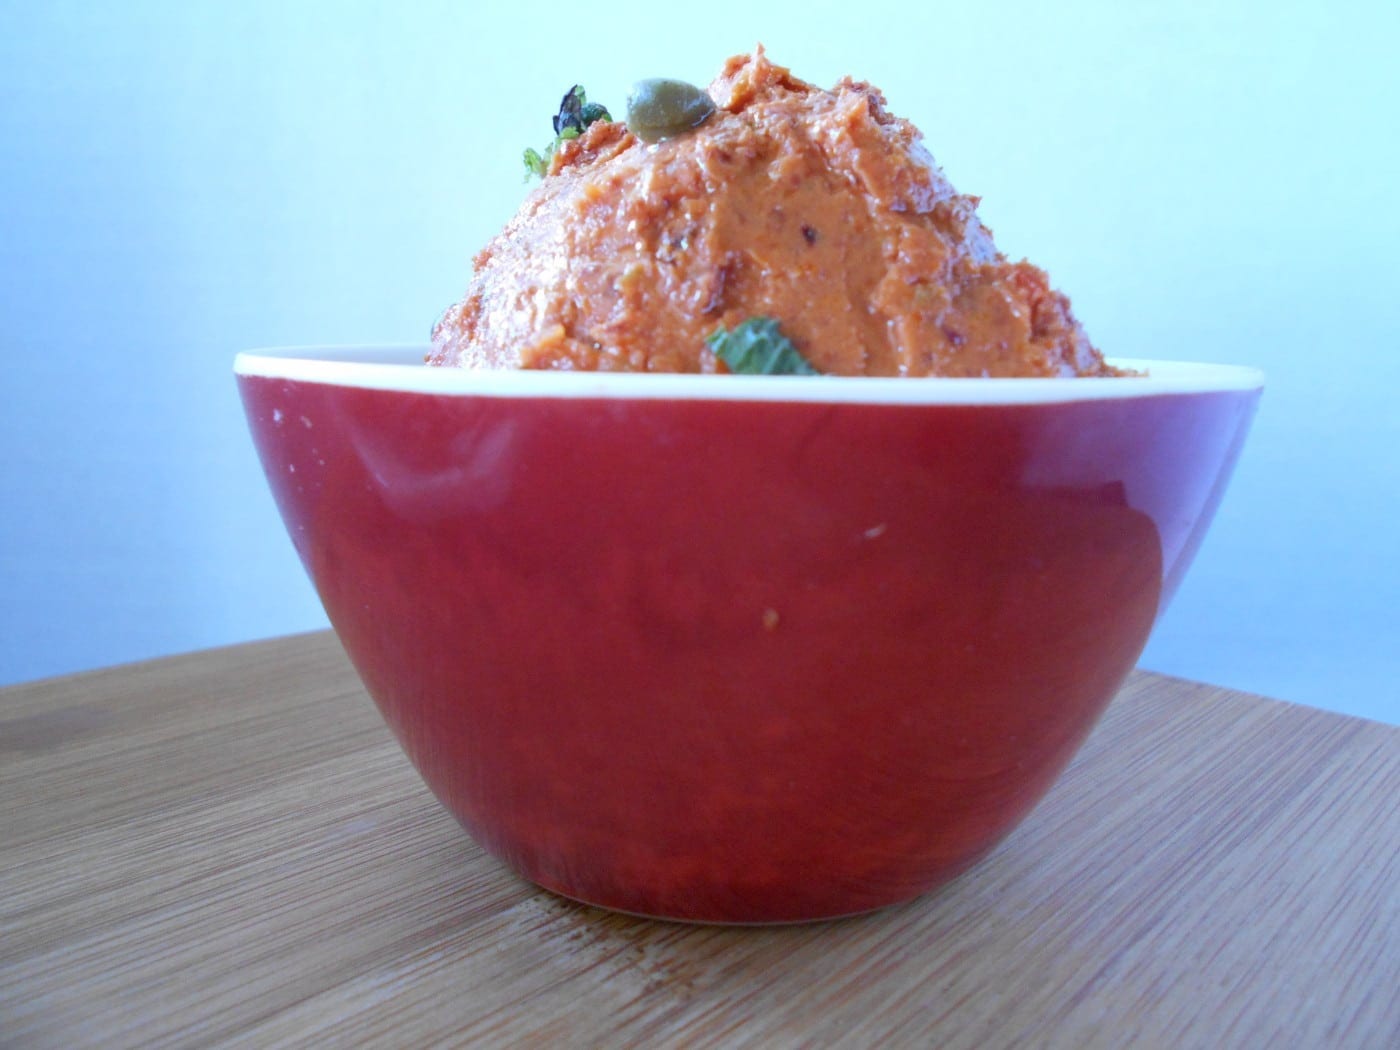 Front view of sun-dried tomaotes spread in a red bowl